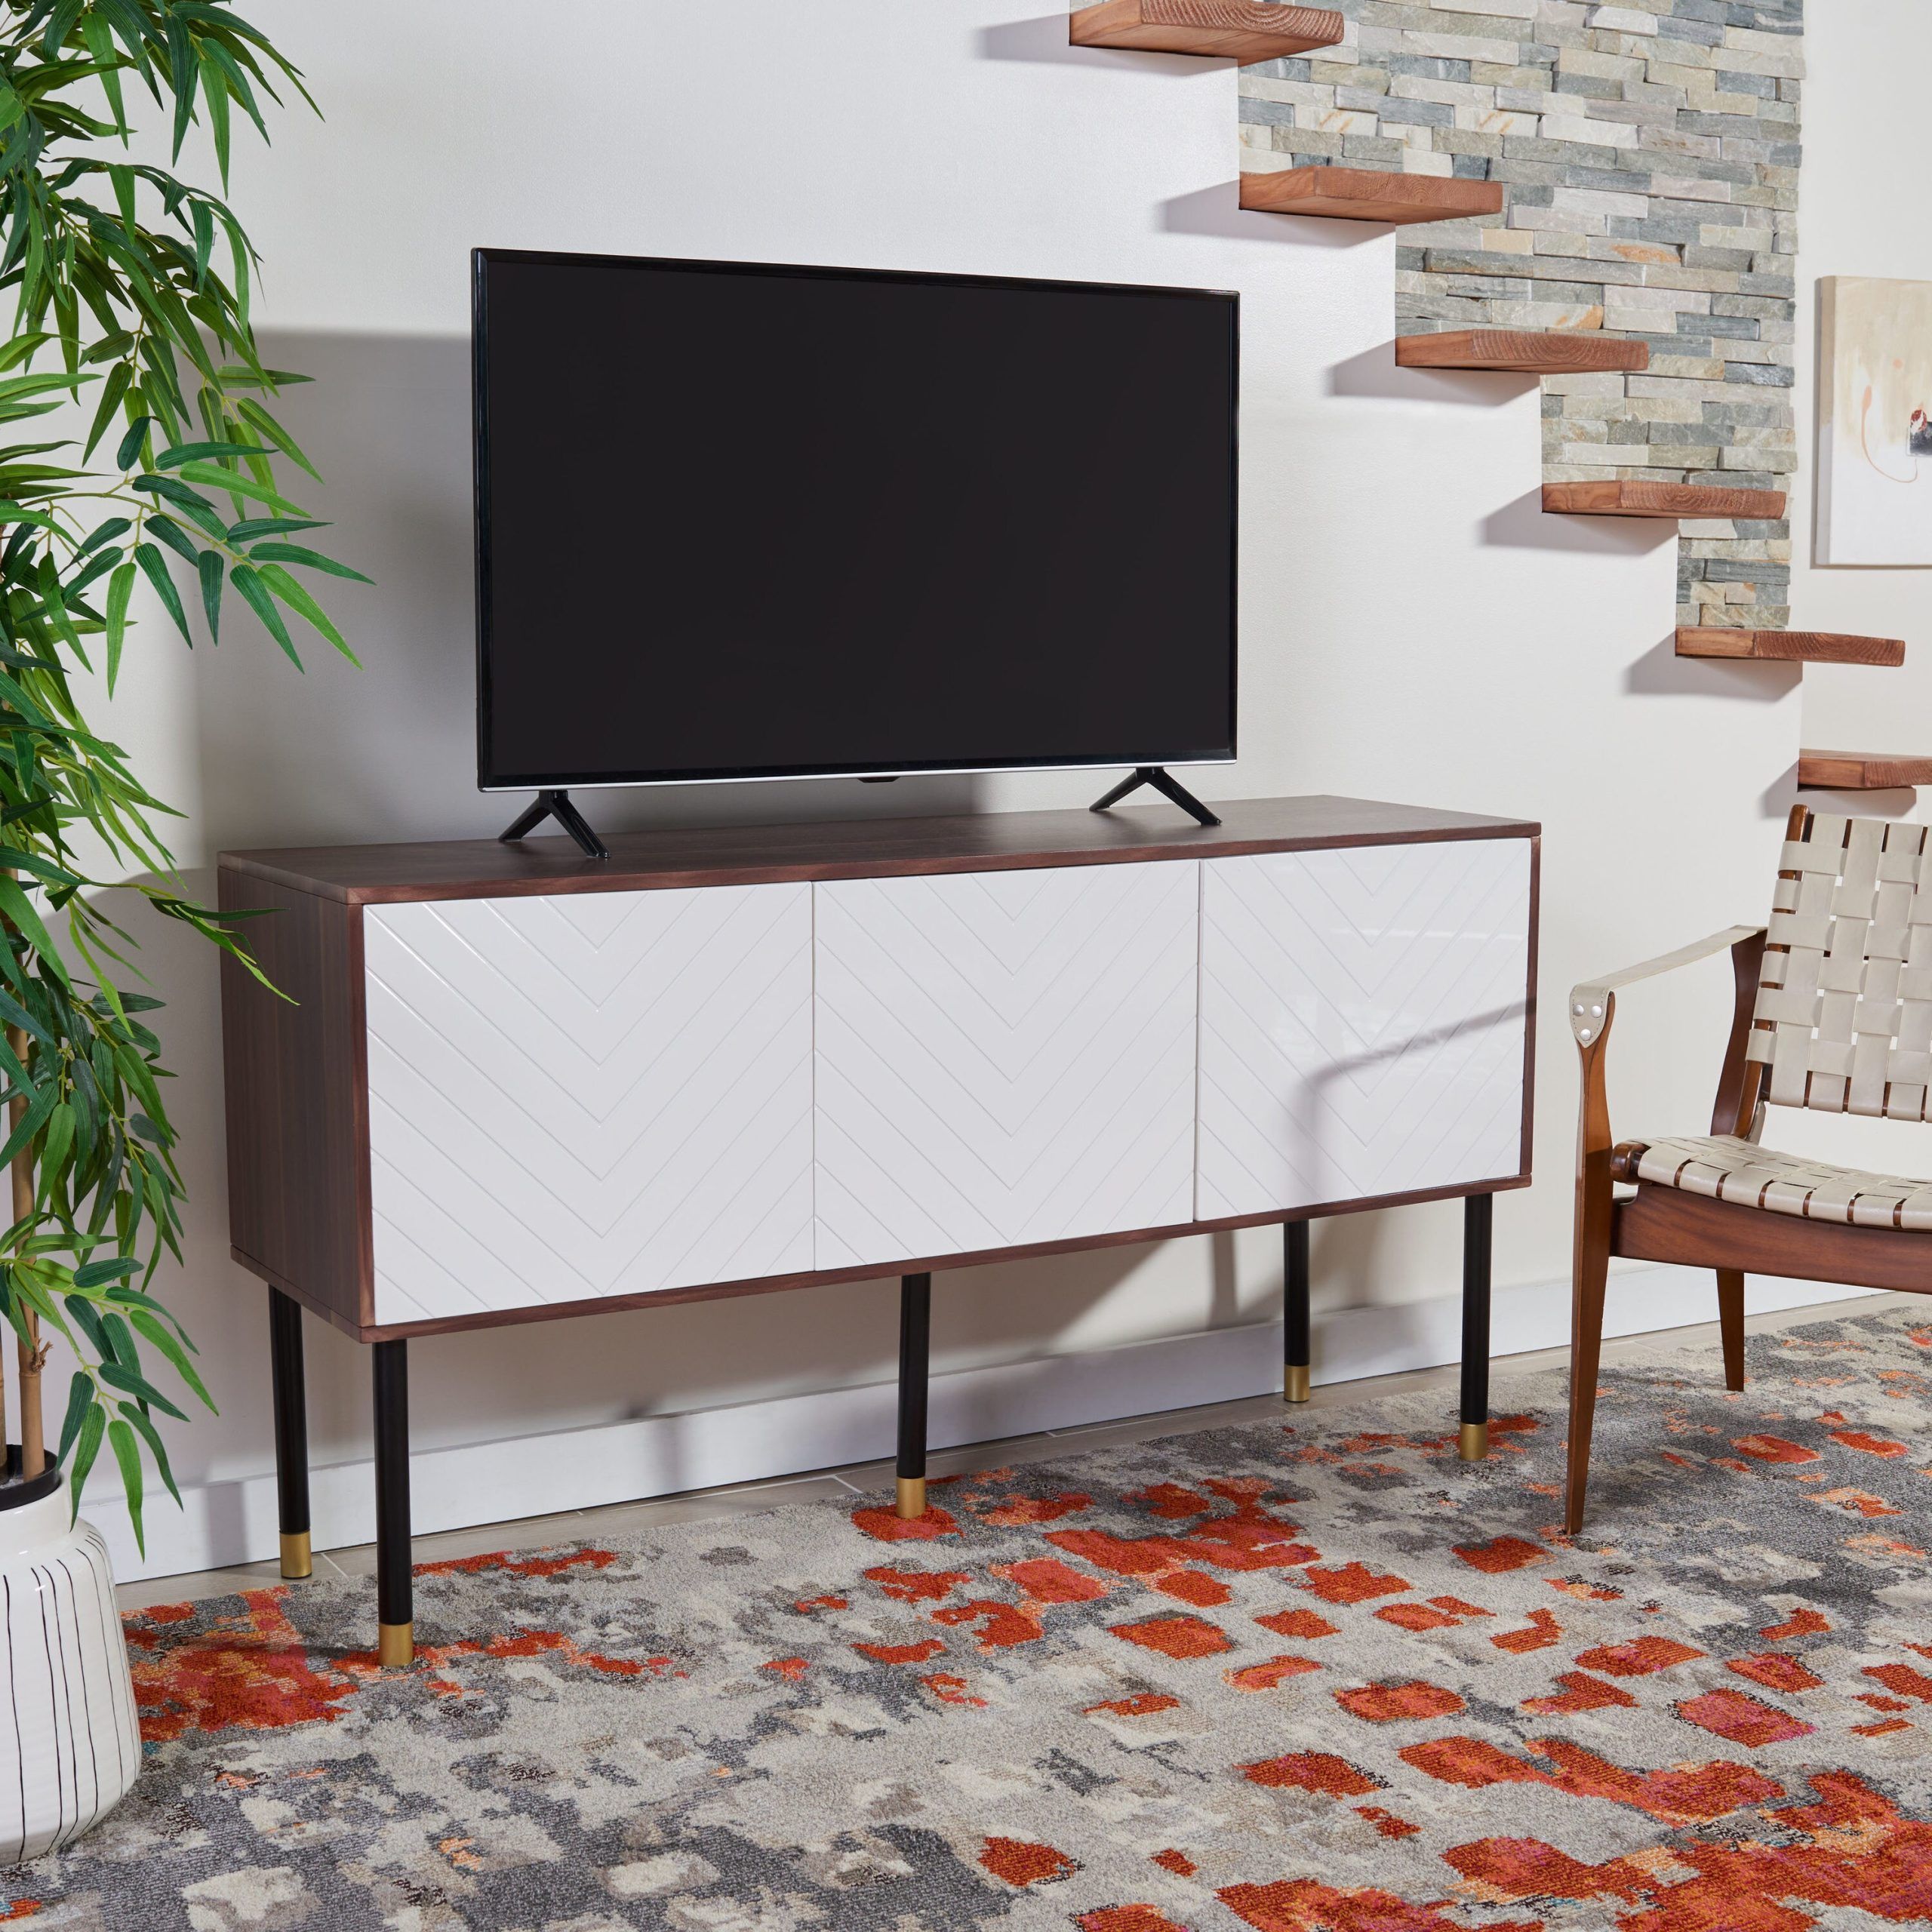 Safavieh Oakley Modern/contemporary Walnut Melamine/white Matte Pu/black  Tube/gold Tv Cabinet (accommodates Tvs Up To 55 In) At Lowes Throughout Oaklee Tv Stands (View 11 of 15)